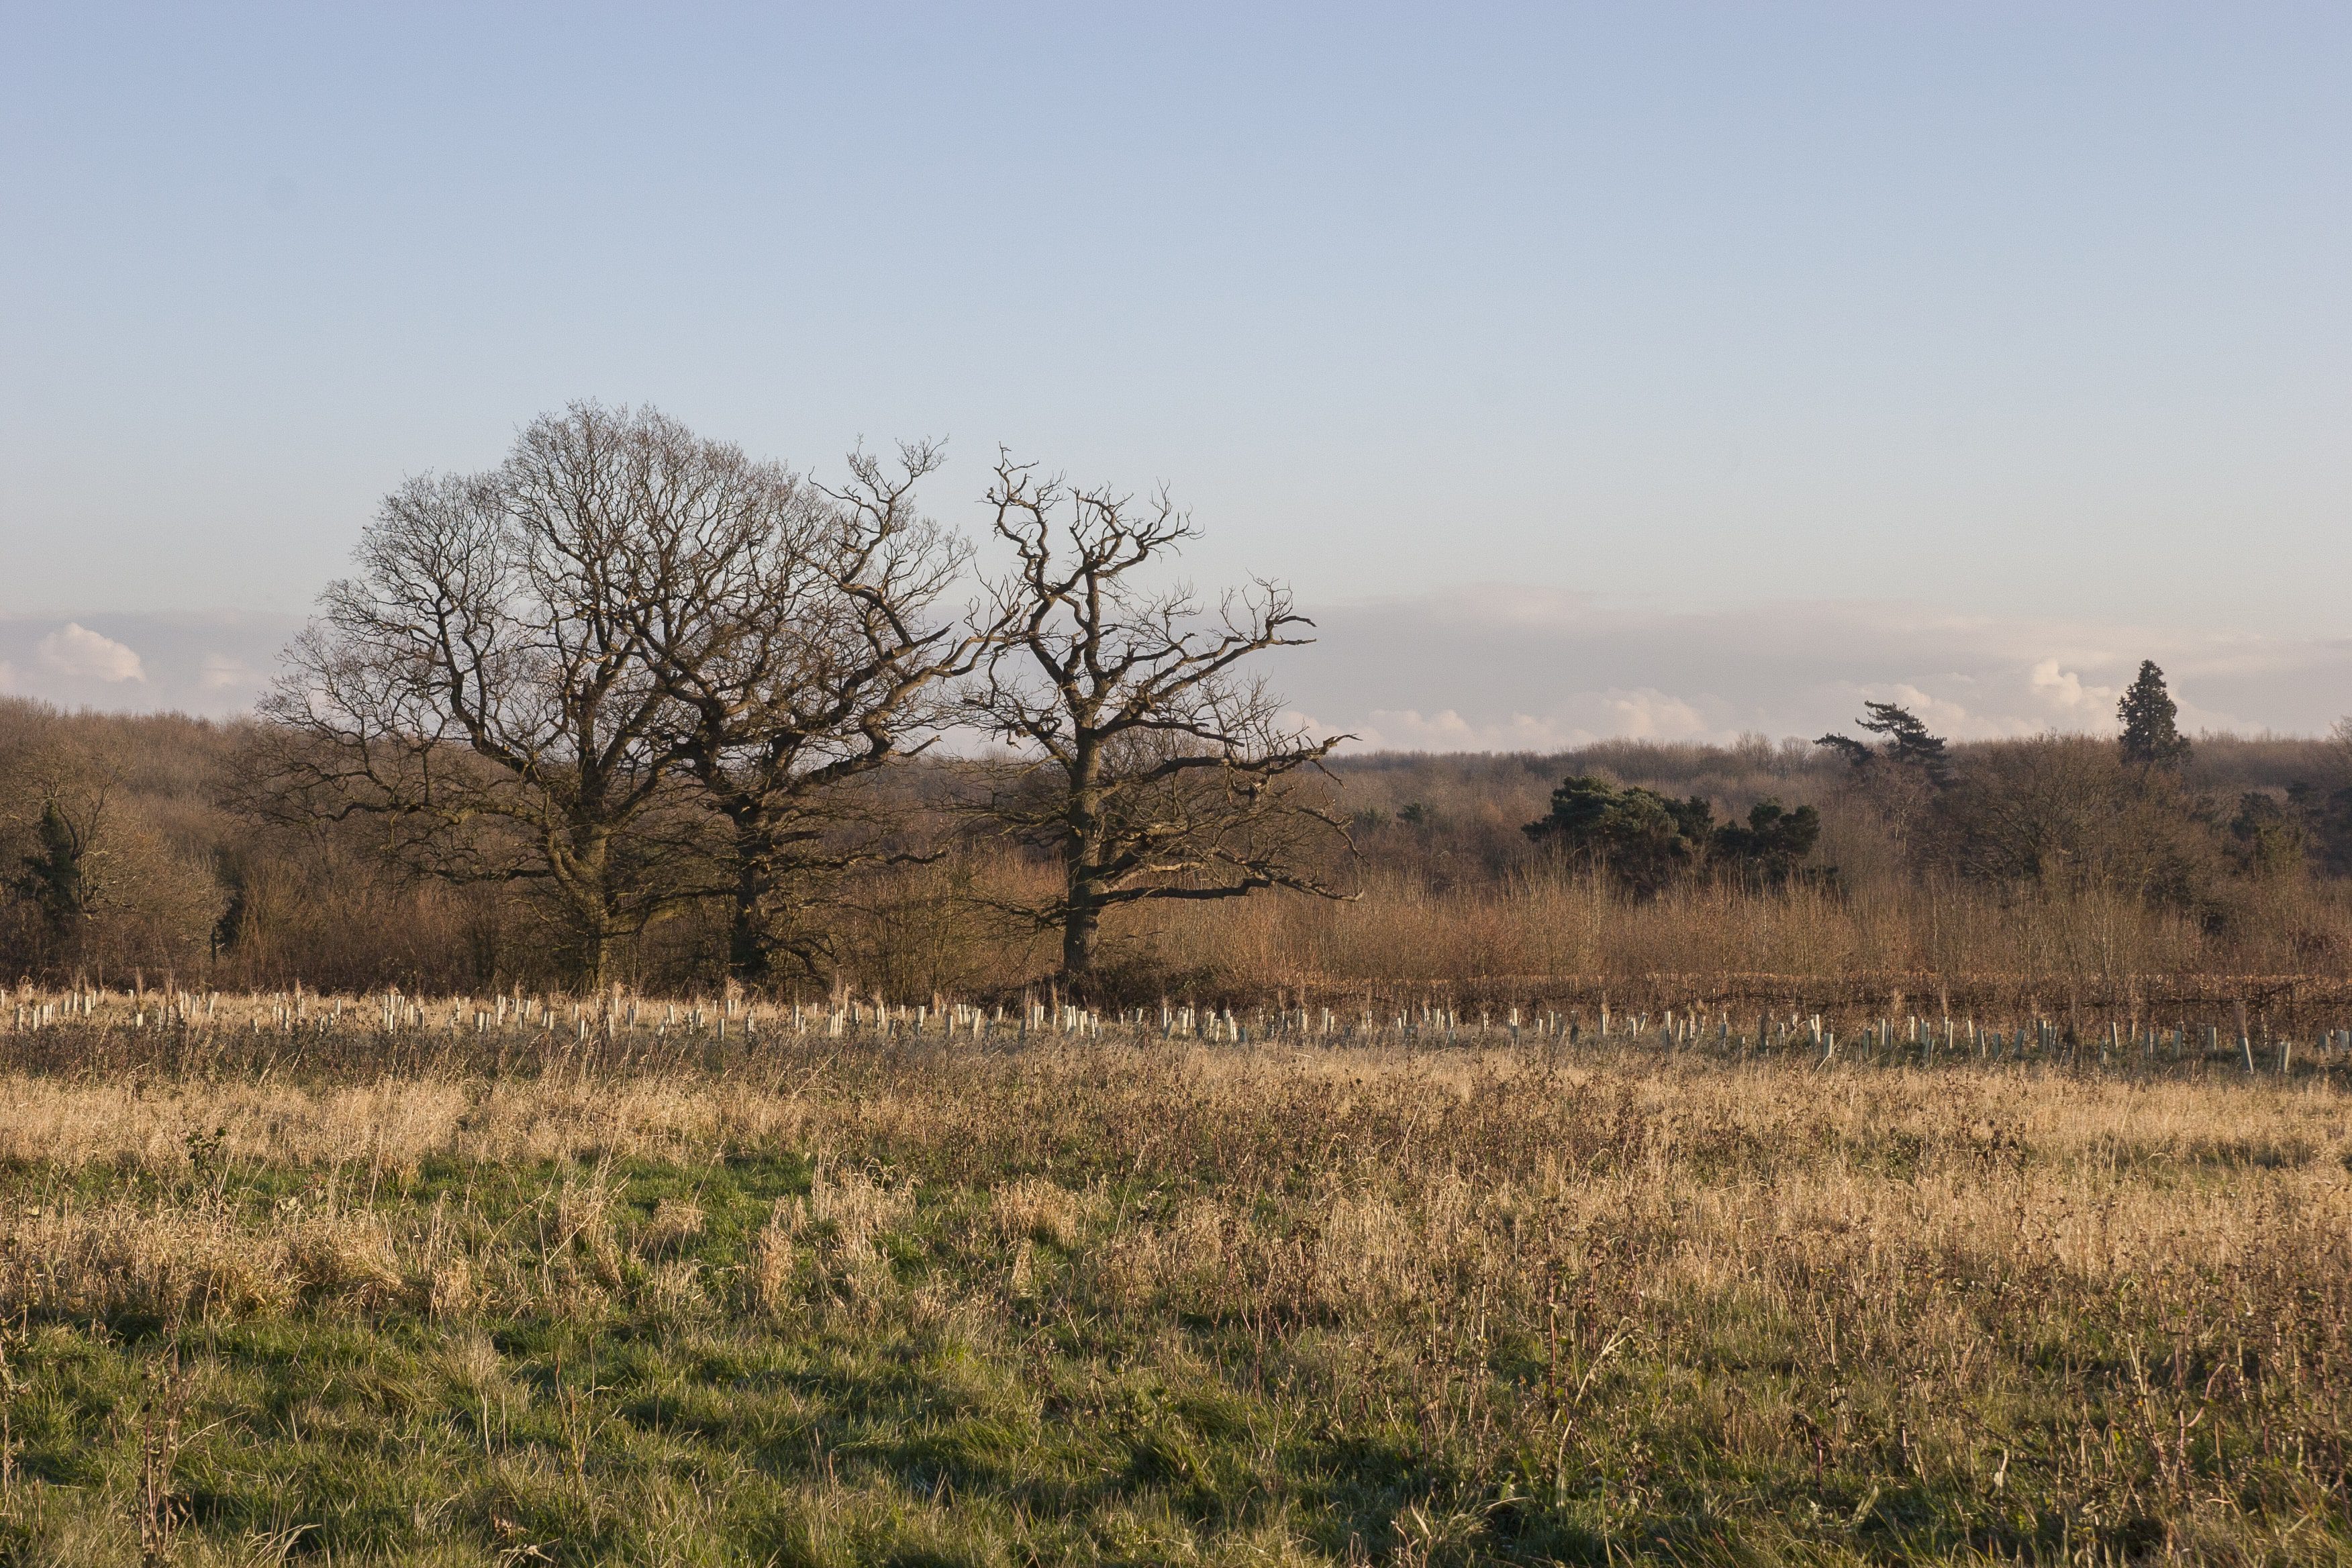 Grass field and trees in distance, view across Hucking Estate.